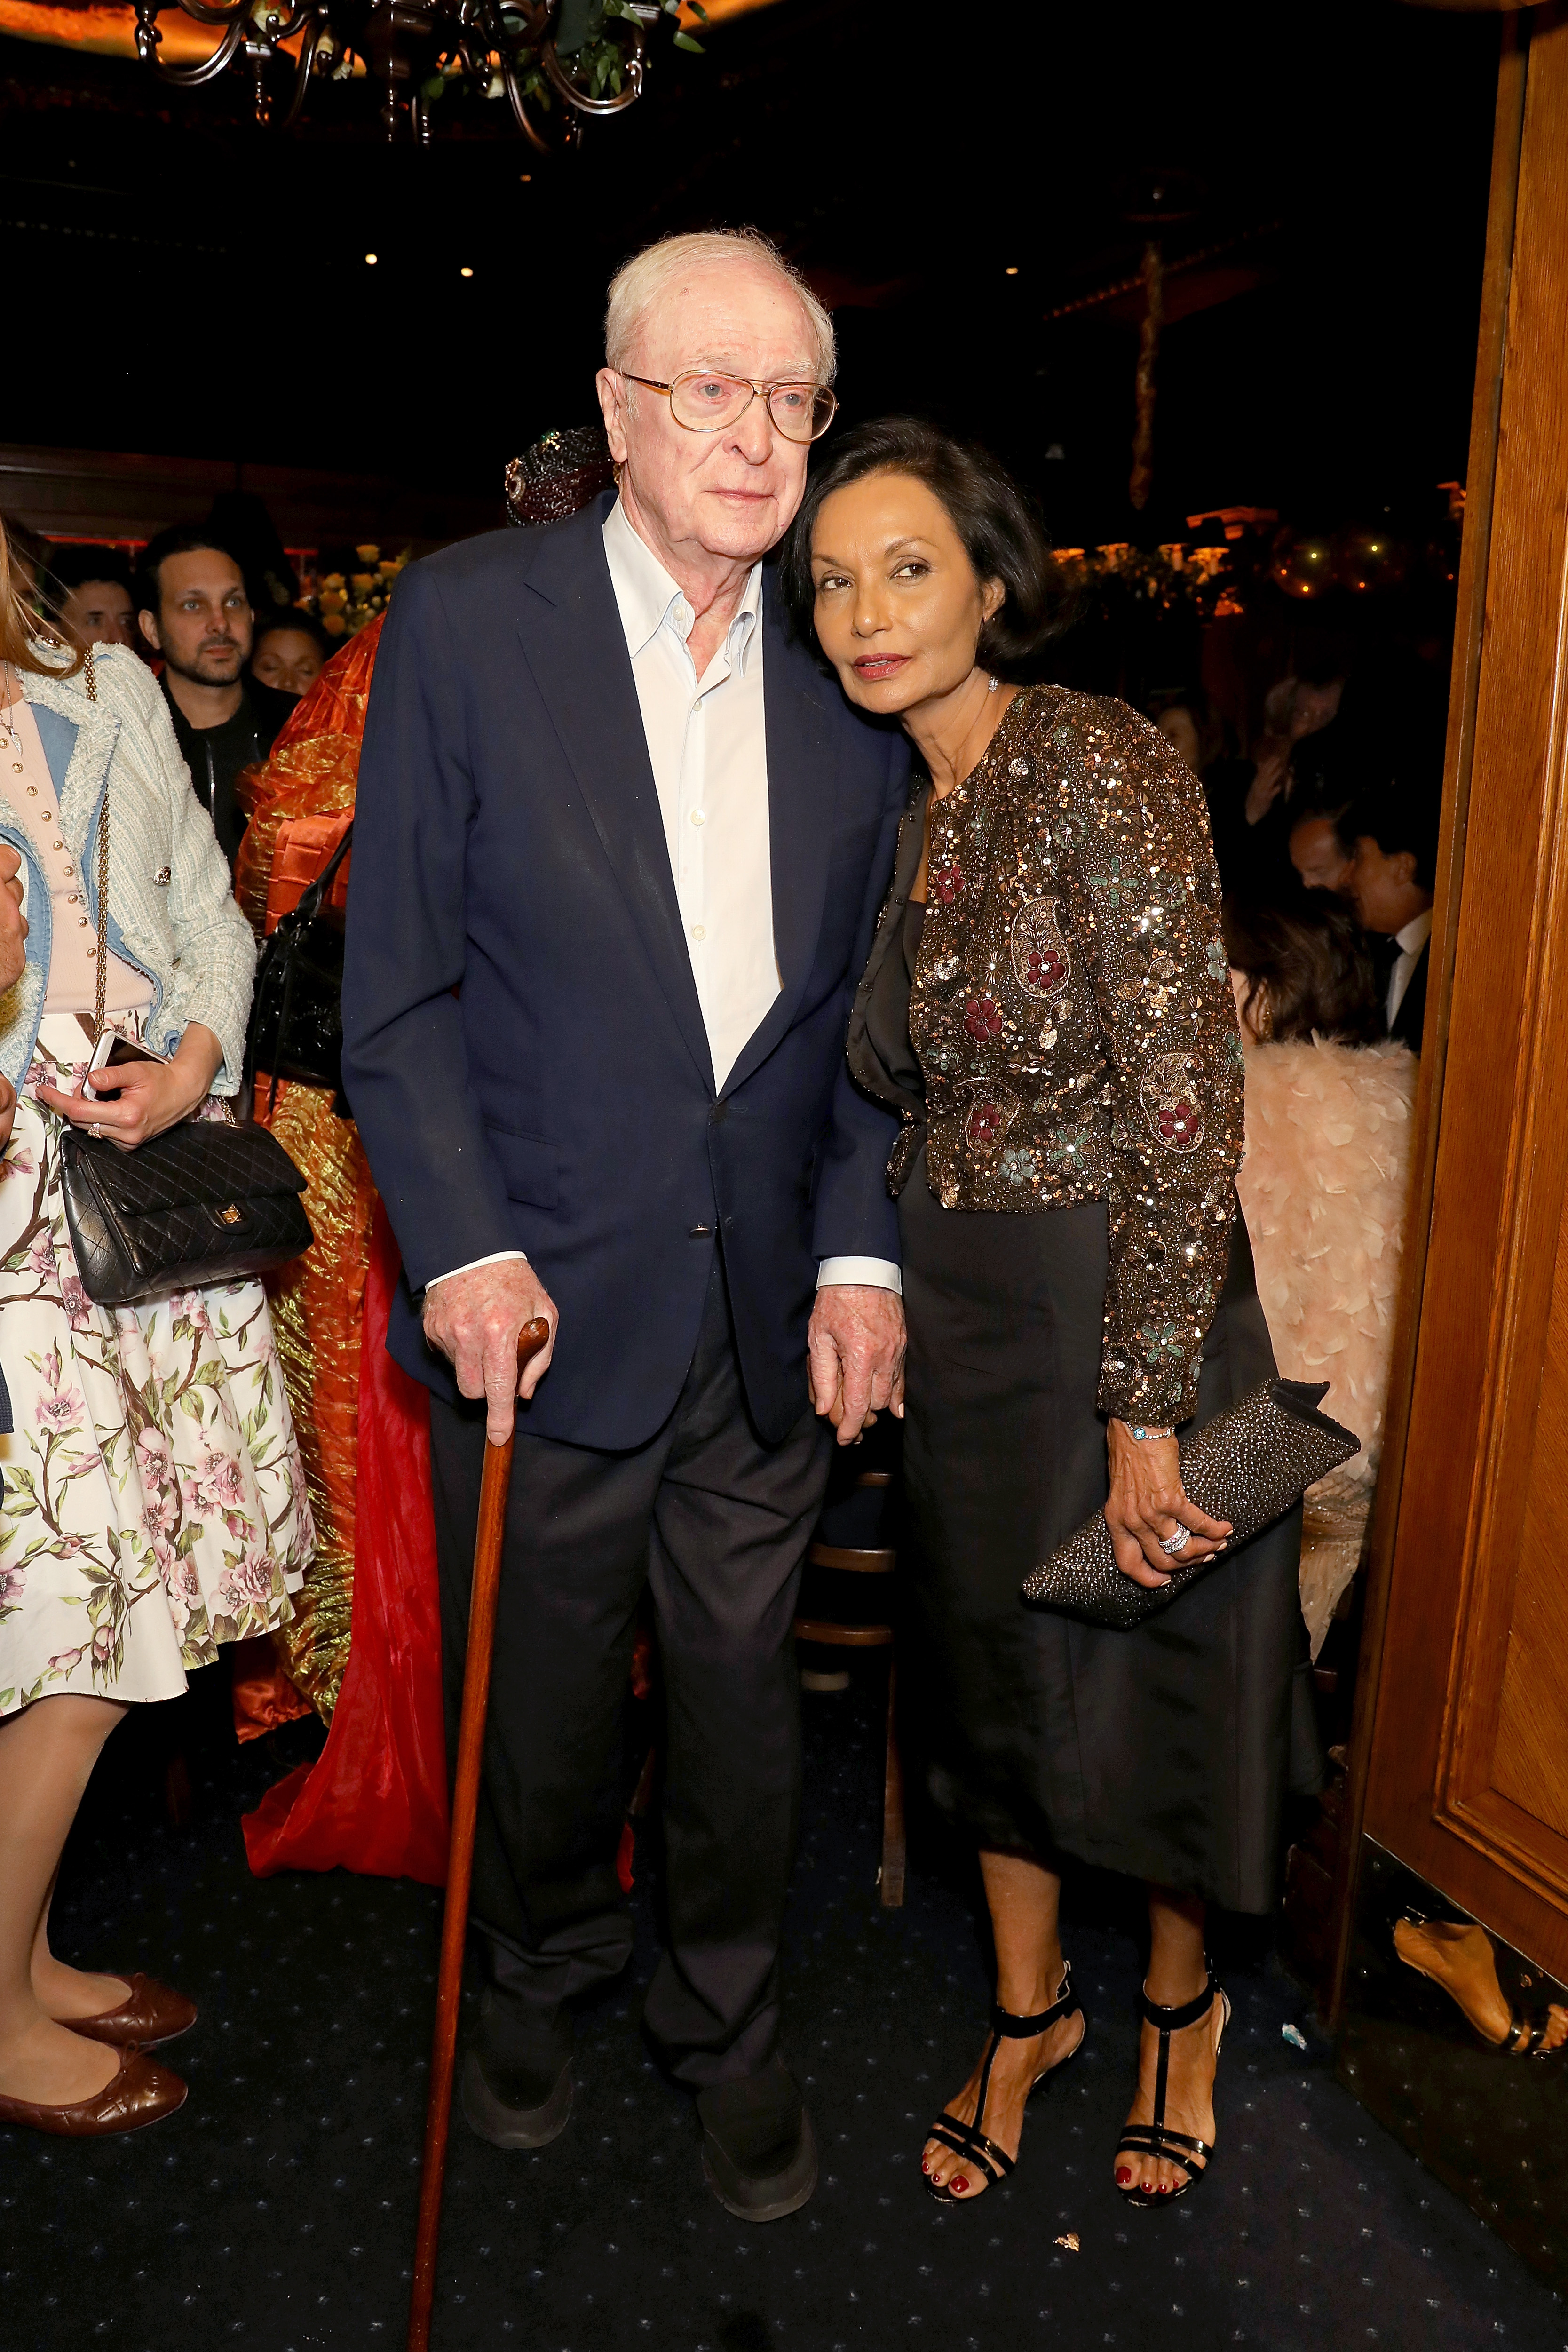 Michael Caine and Shakira Caine attend an event on May 23, 2019 in London, England. | Source: Getty Images